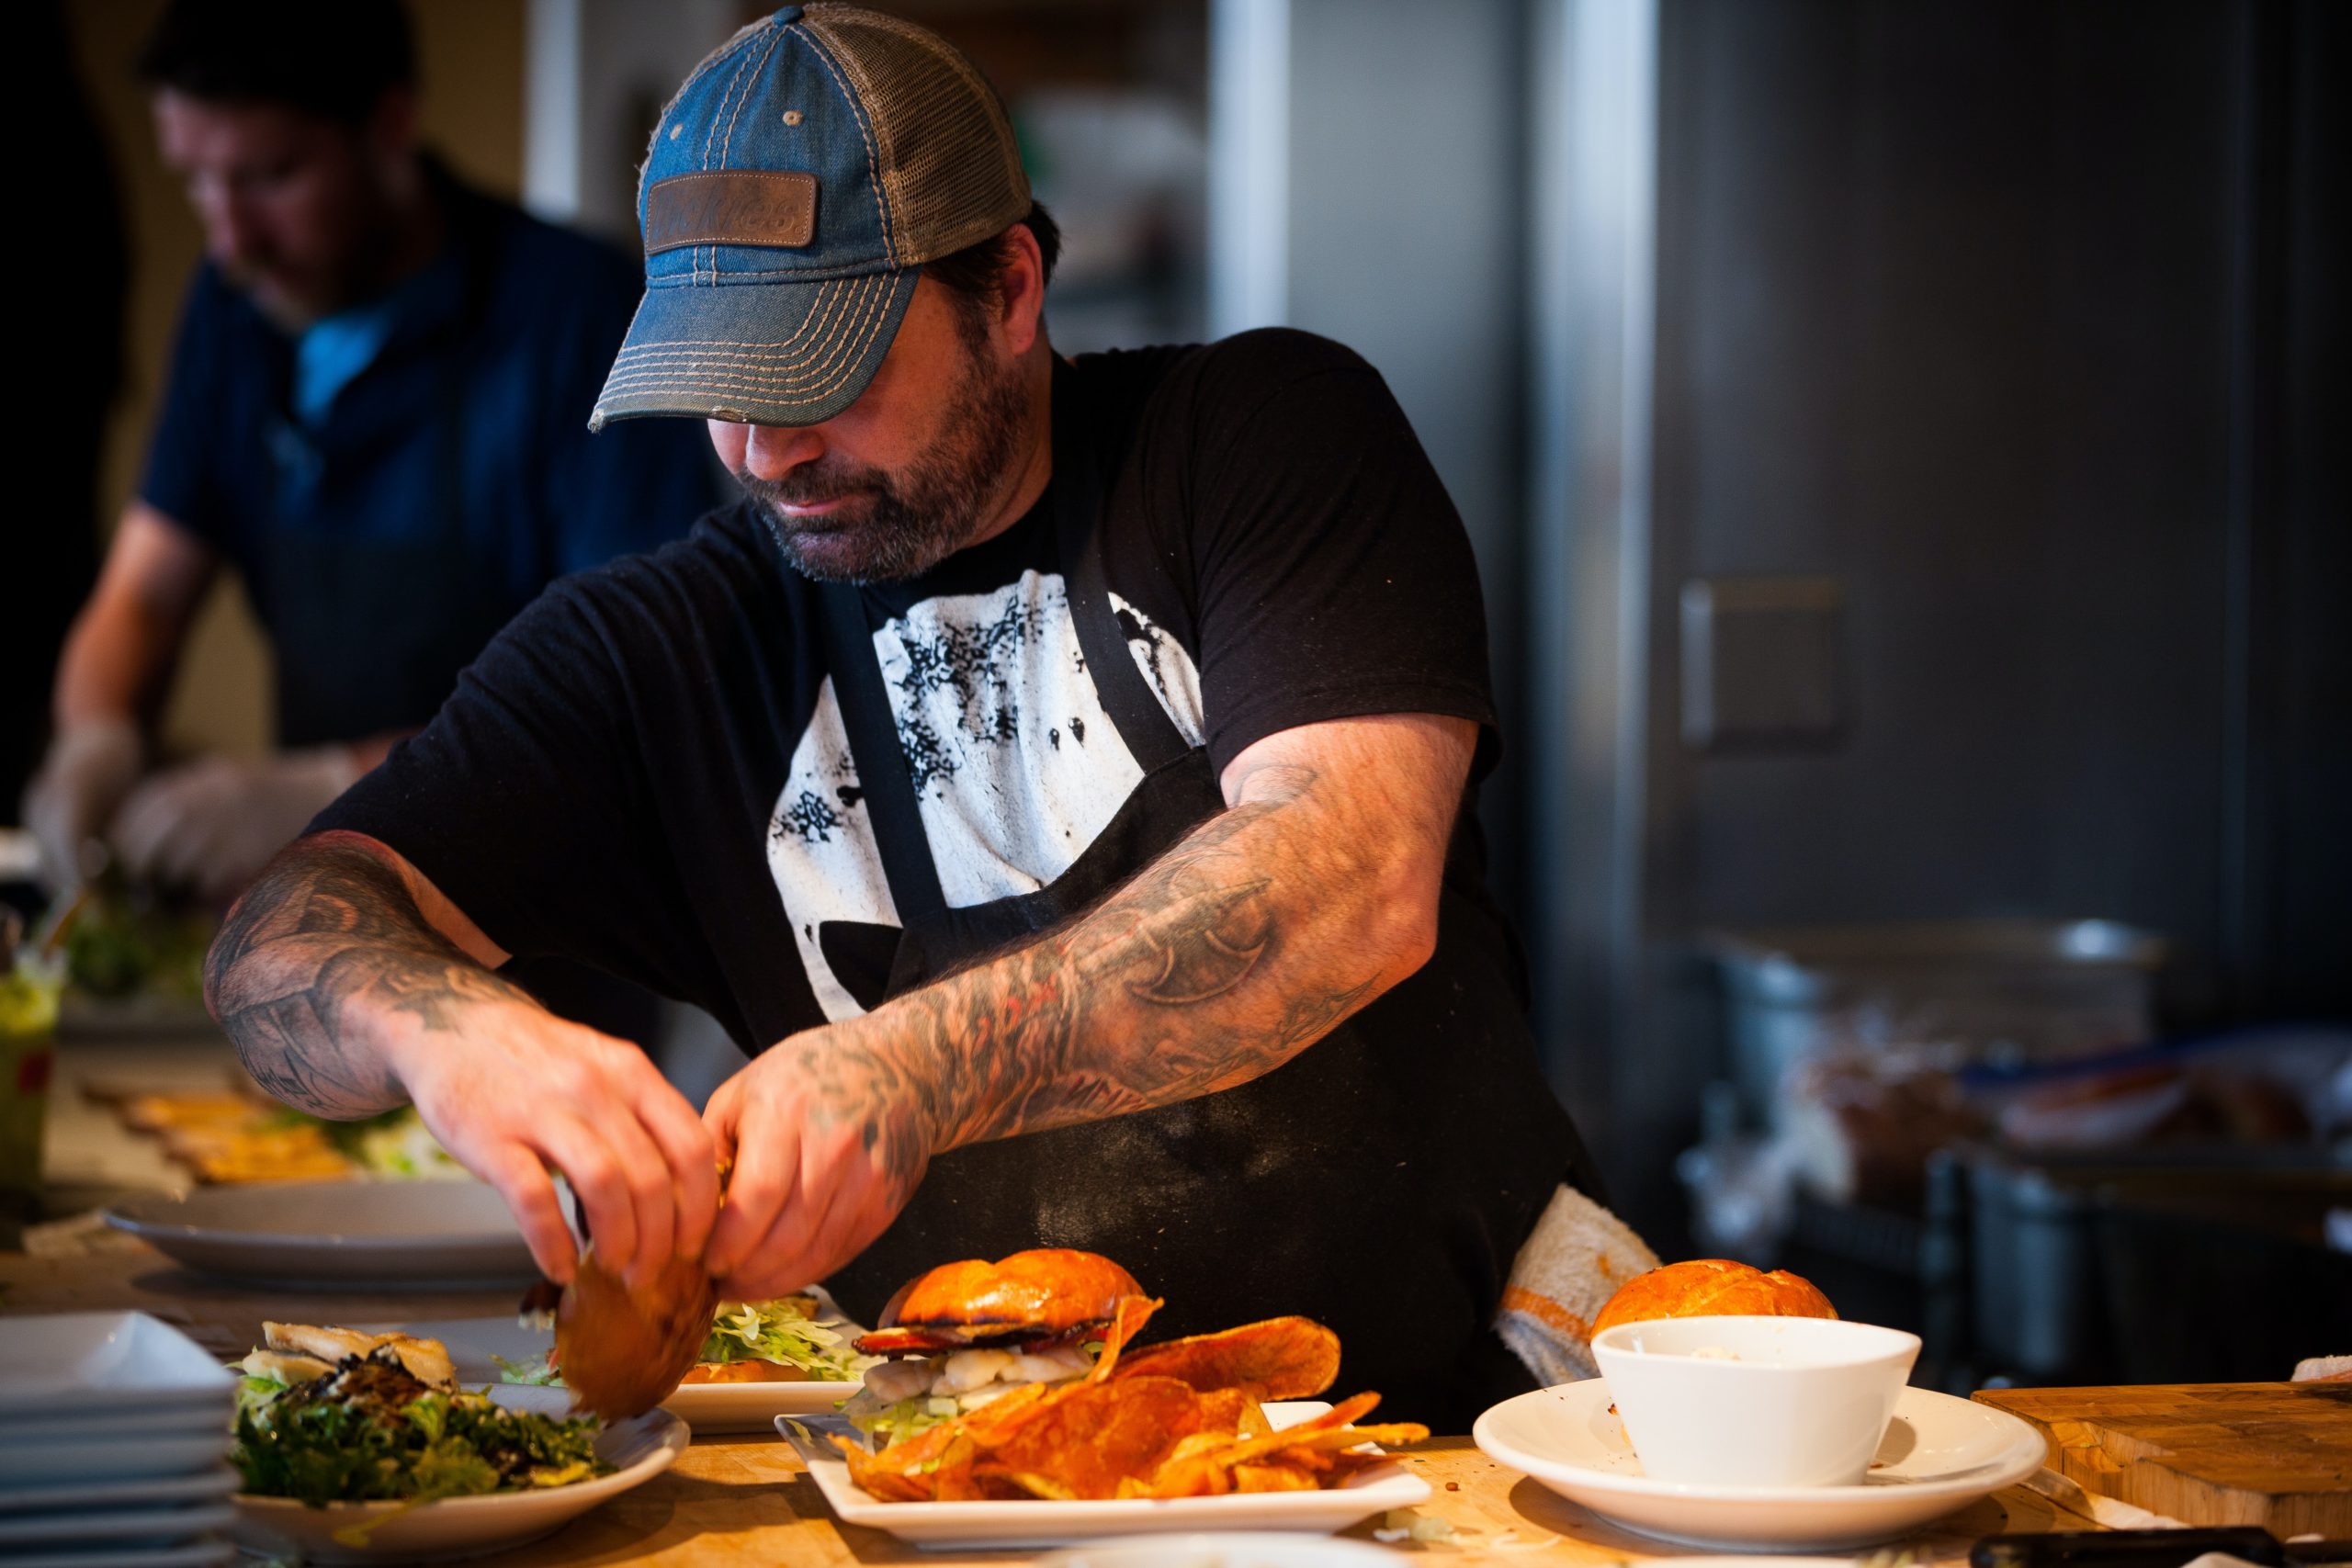 man wearing apron and cap putting together a burger